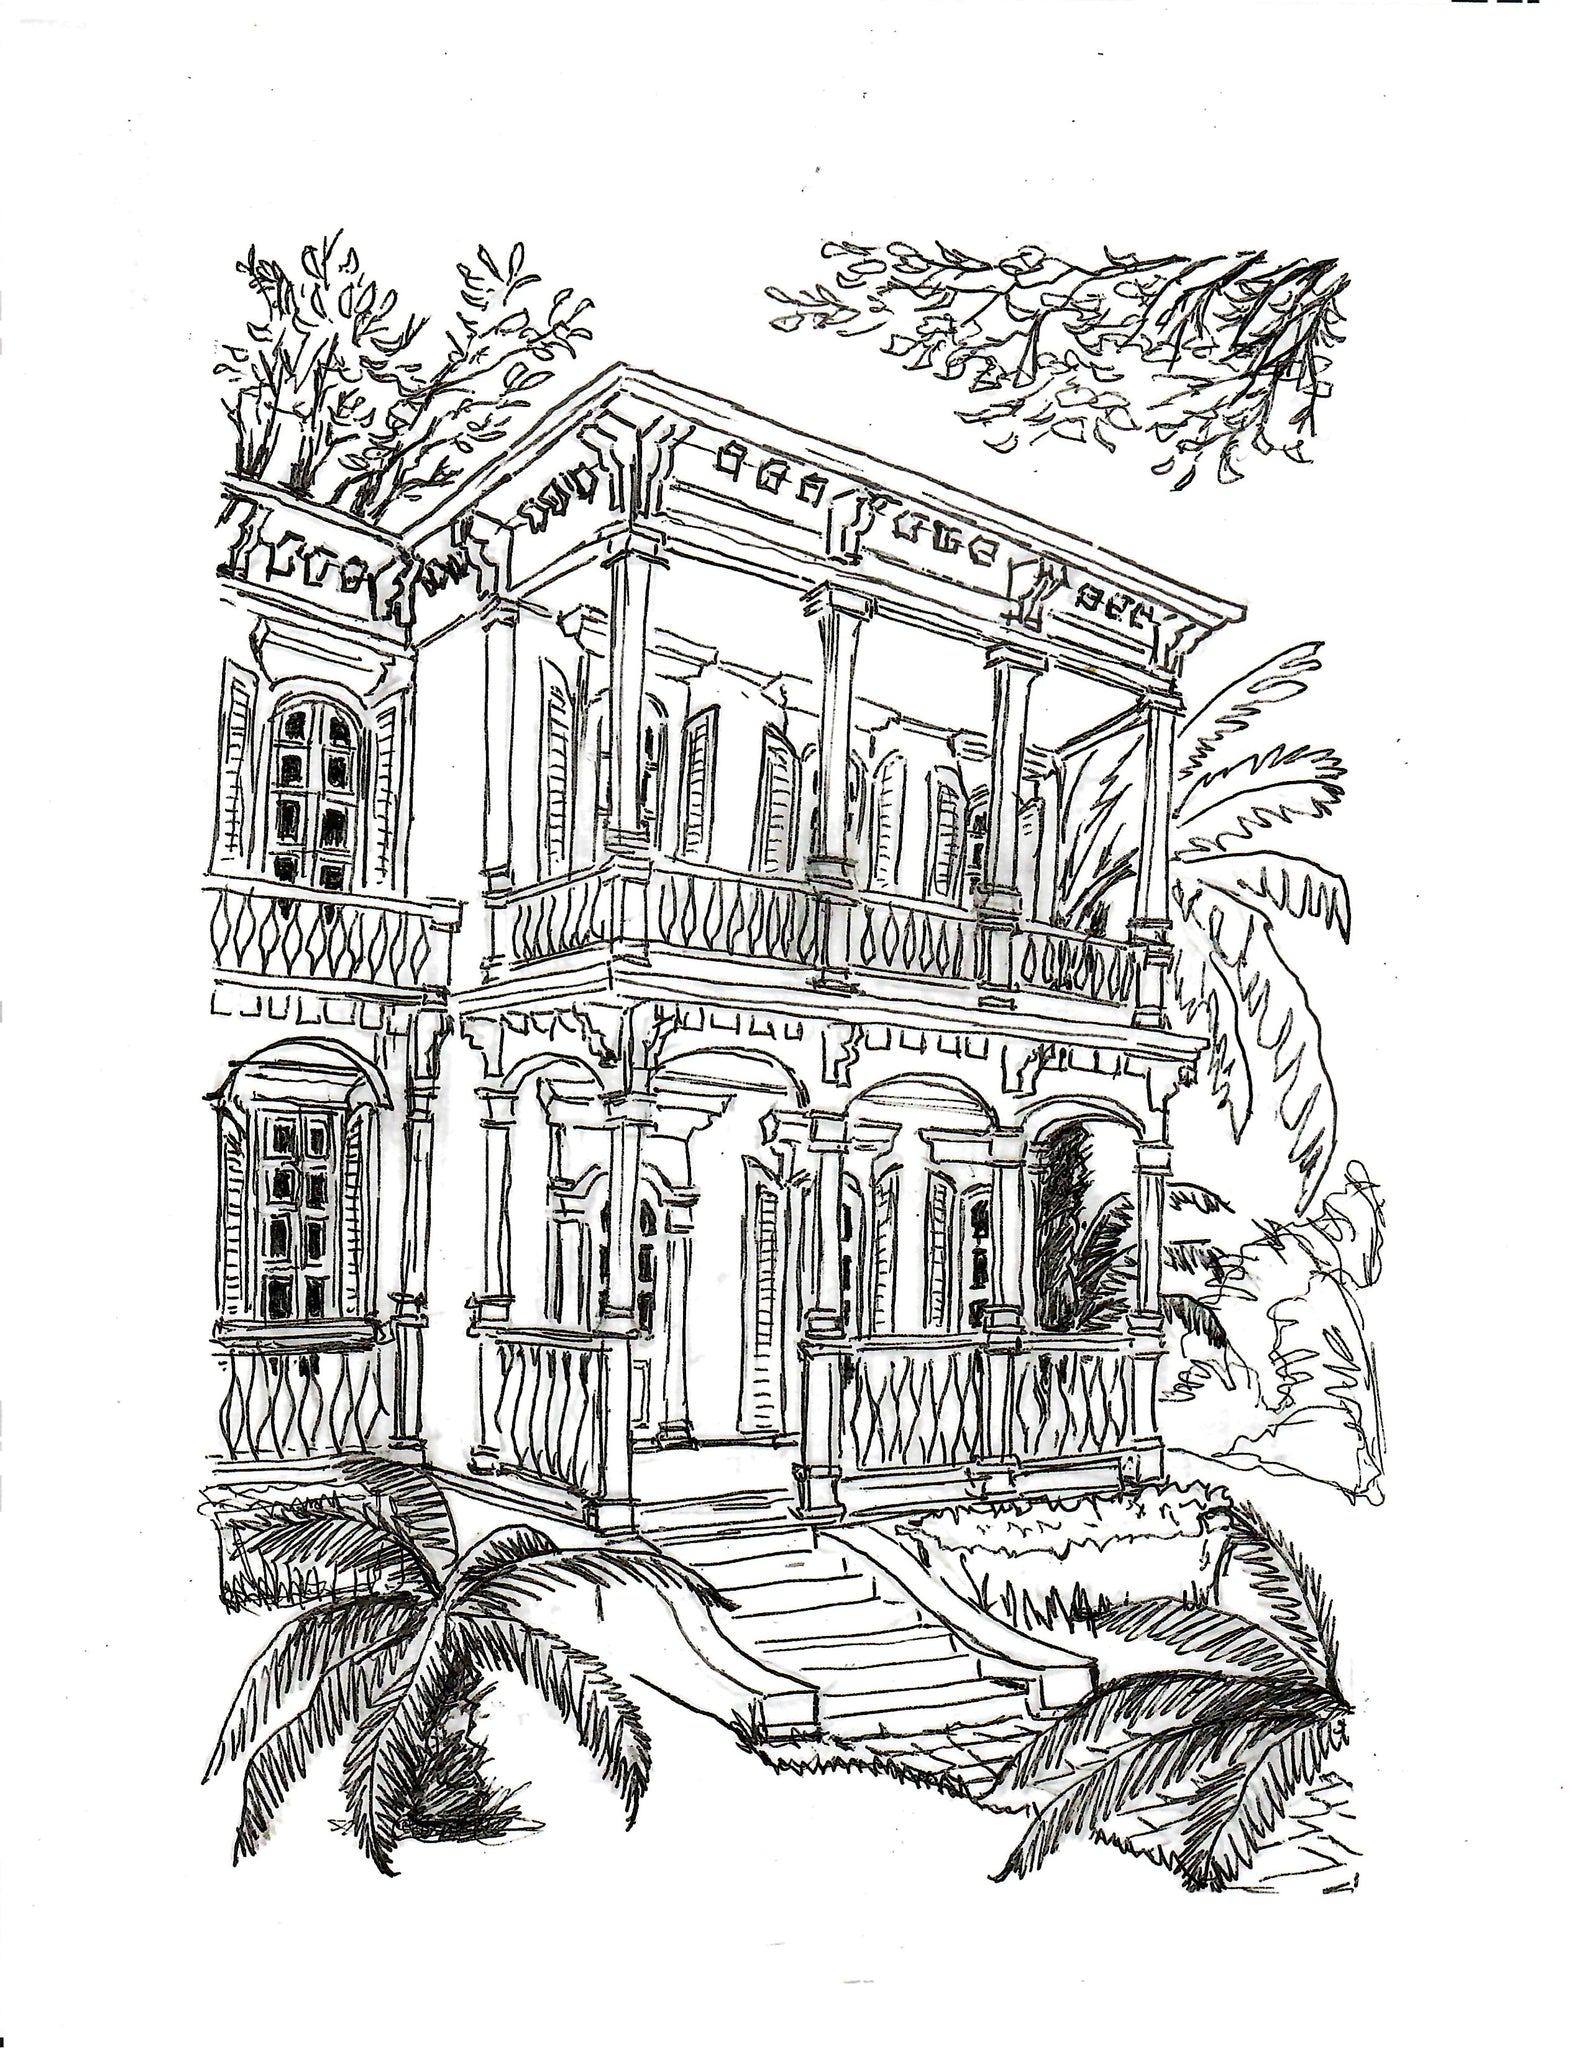 PEN & INK - NEW ORLEANS UPTOWN TWO STORY MANSION